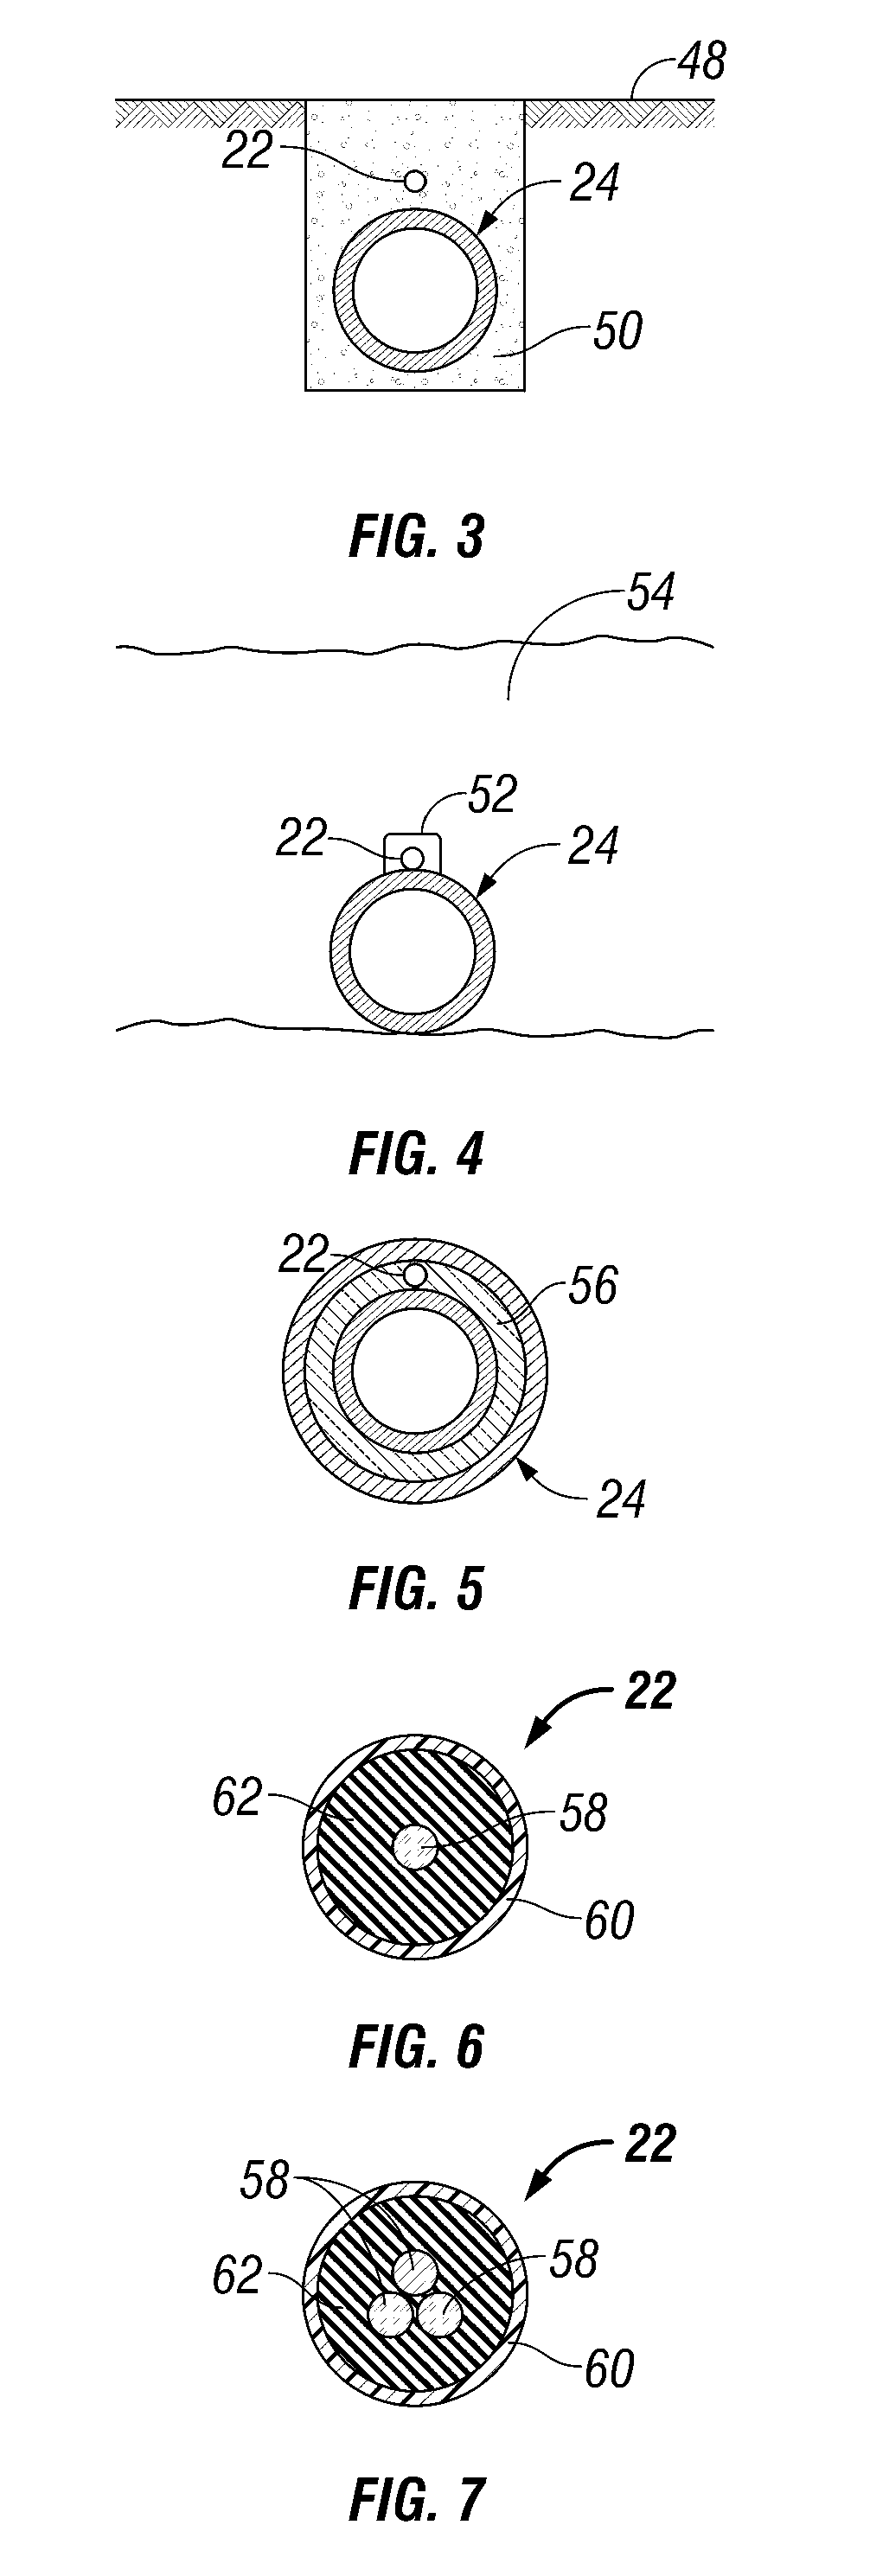 System and method for monitoring structures